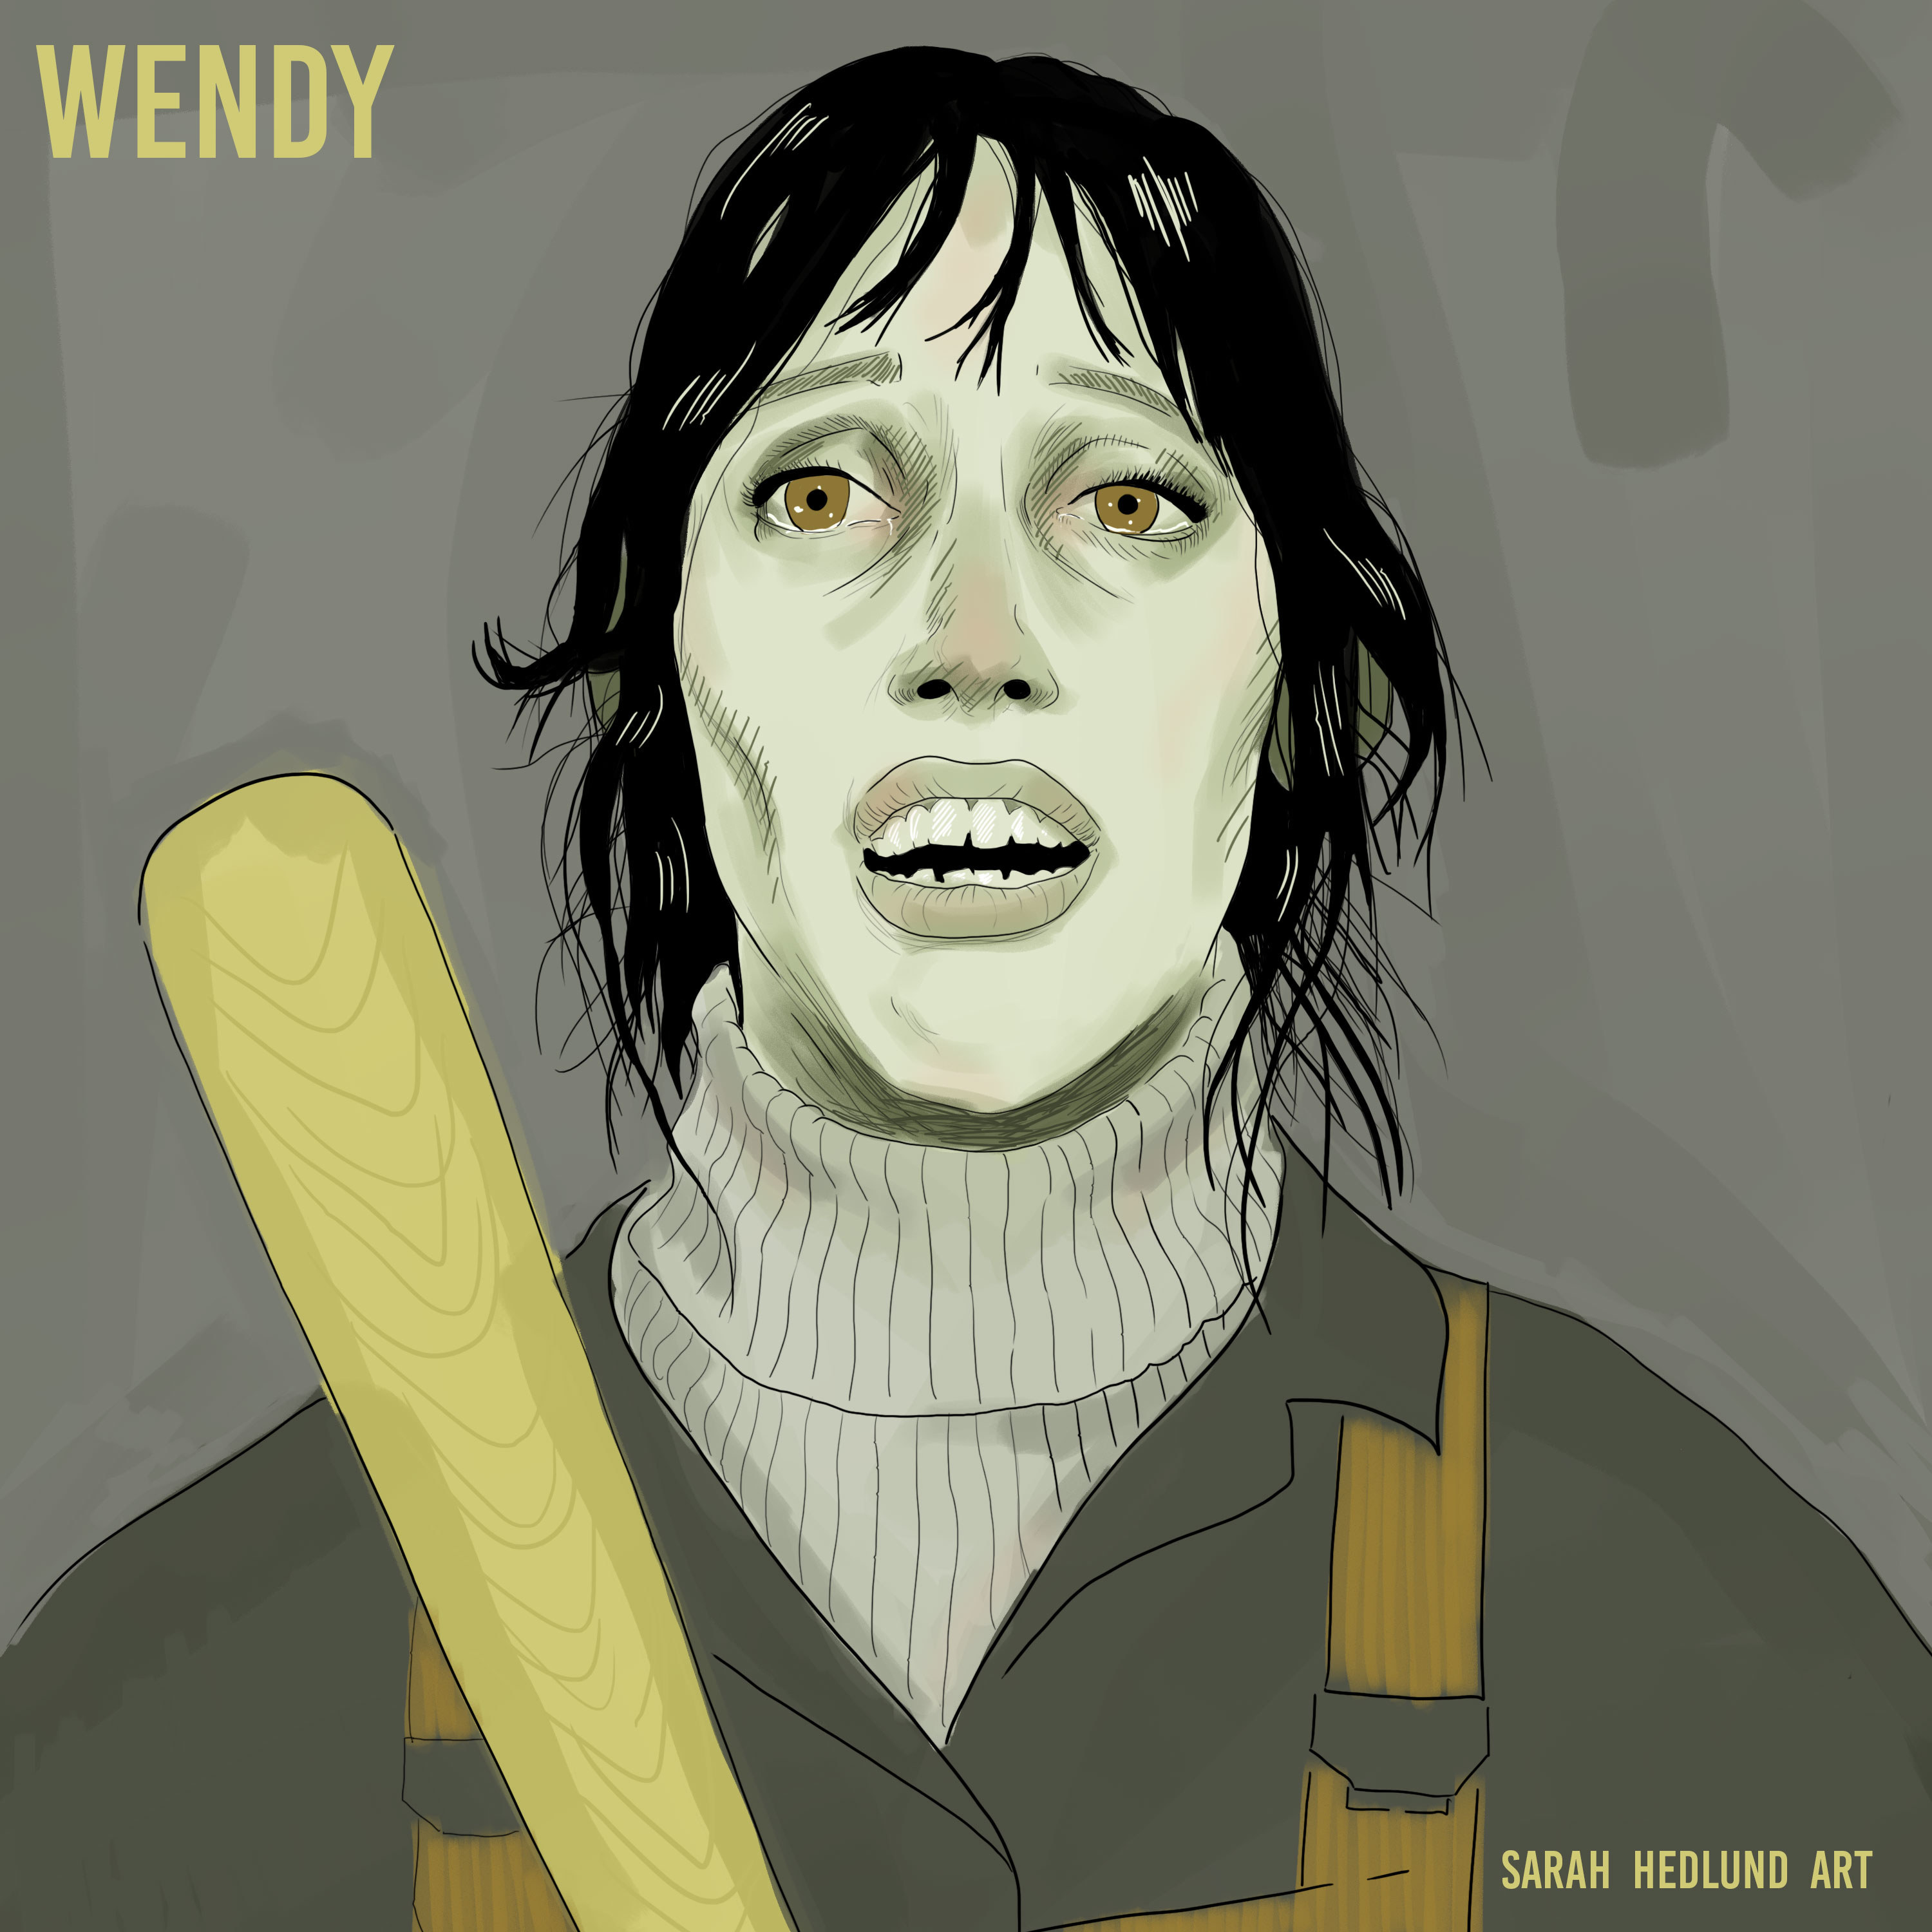 Day 30: Wendy (Shelley Duvall) The Shining - 1980